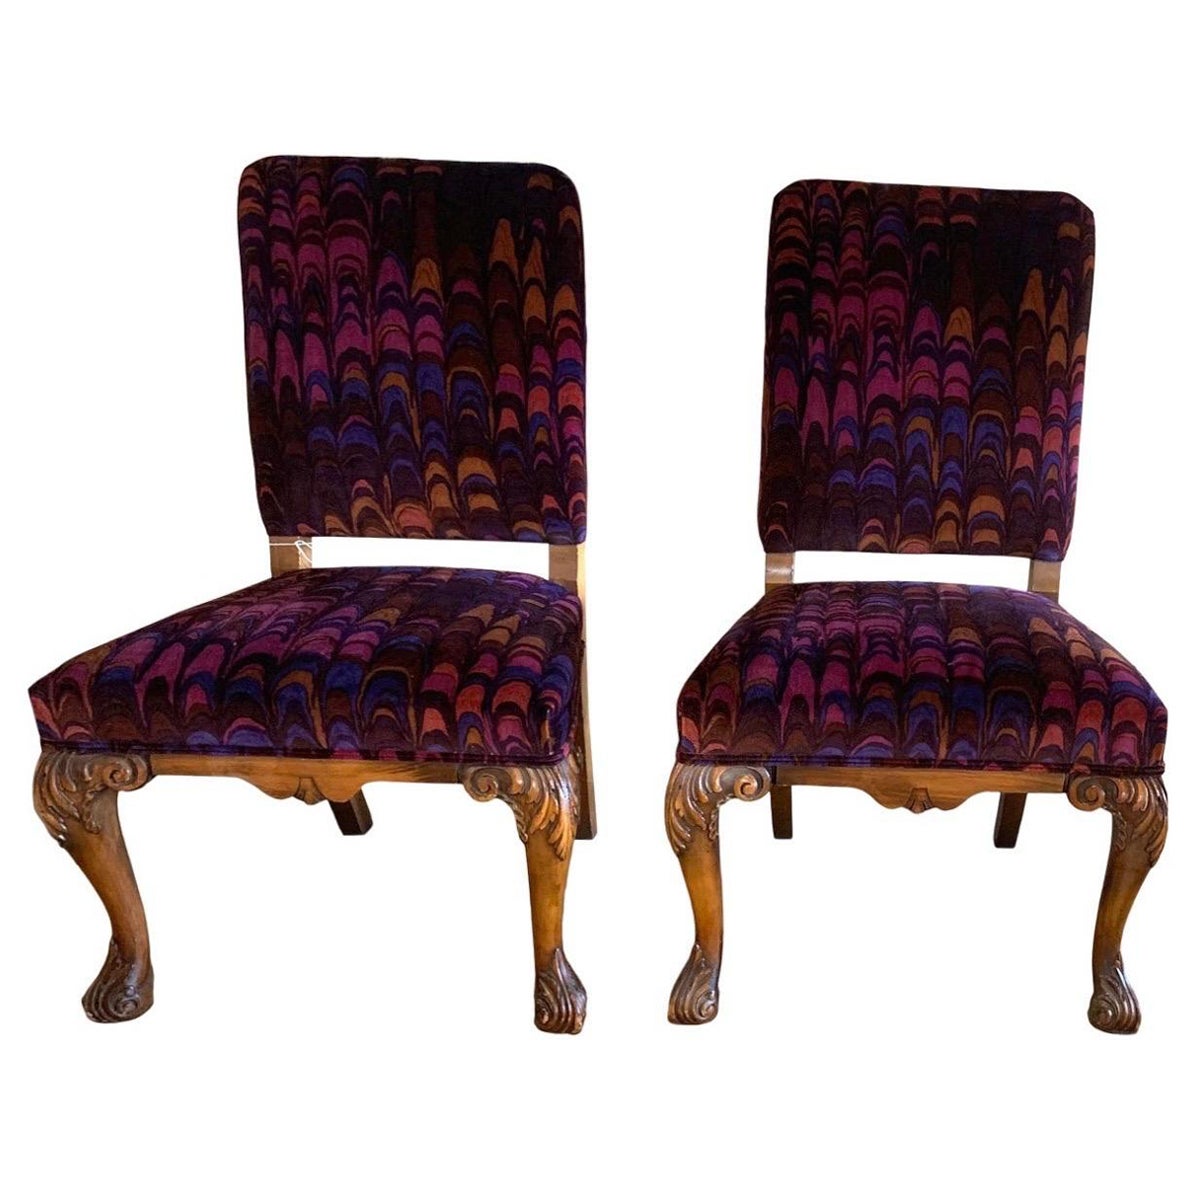 1960s Vintage Jack Lenor Larson Upholstered Side Chairs - a Pair For Sale